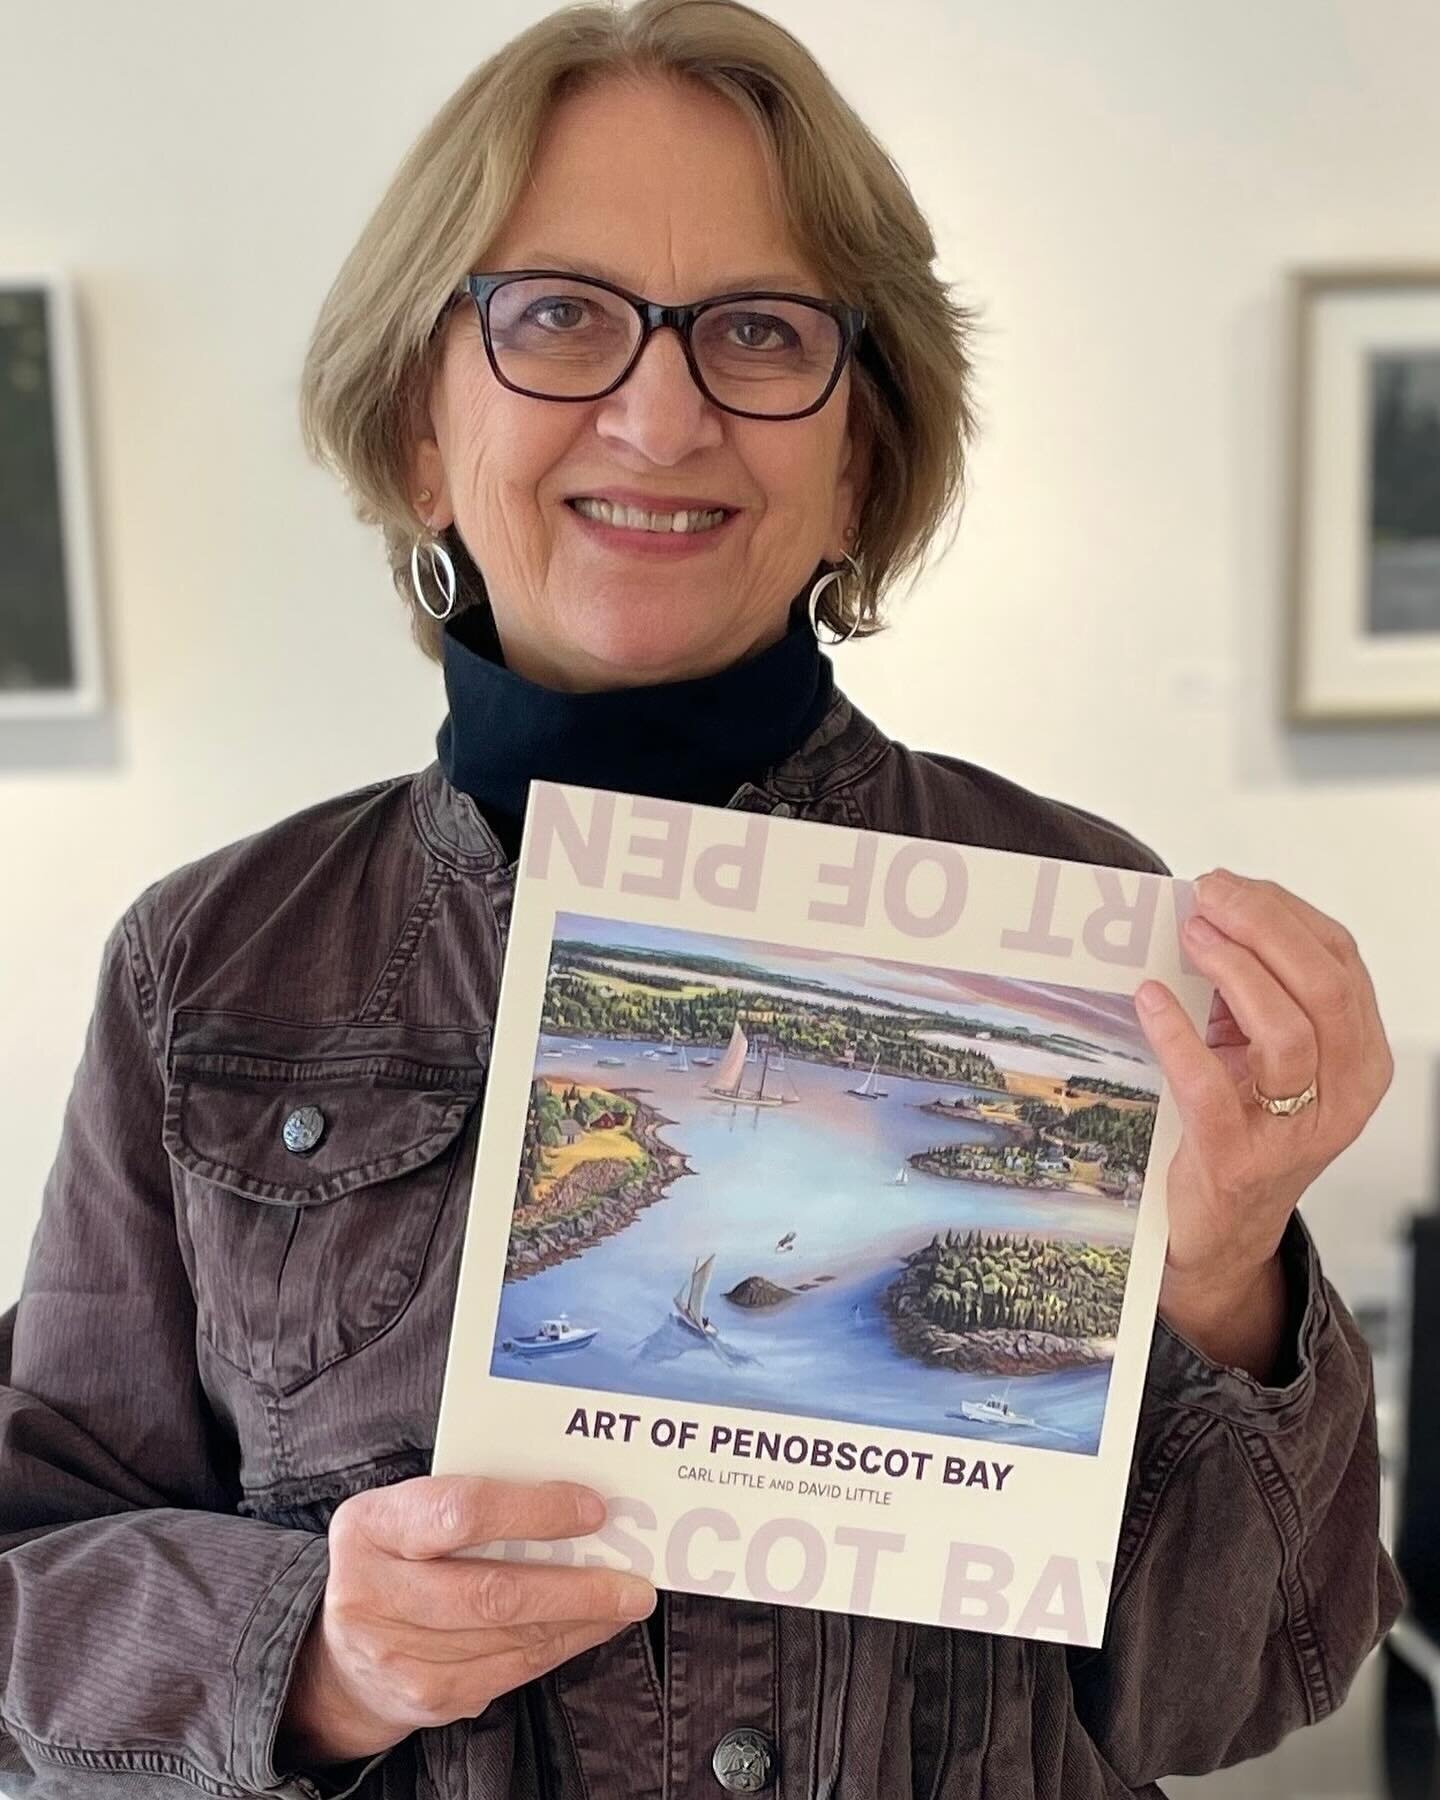 The long awaited &ldquo;Art of Penobscot Bay&rdquo; by Carl Little and David Little is here! The book includes works both historical and contemporary, with samples of work from the island and mainland towns in and around the Bay. Copies are available